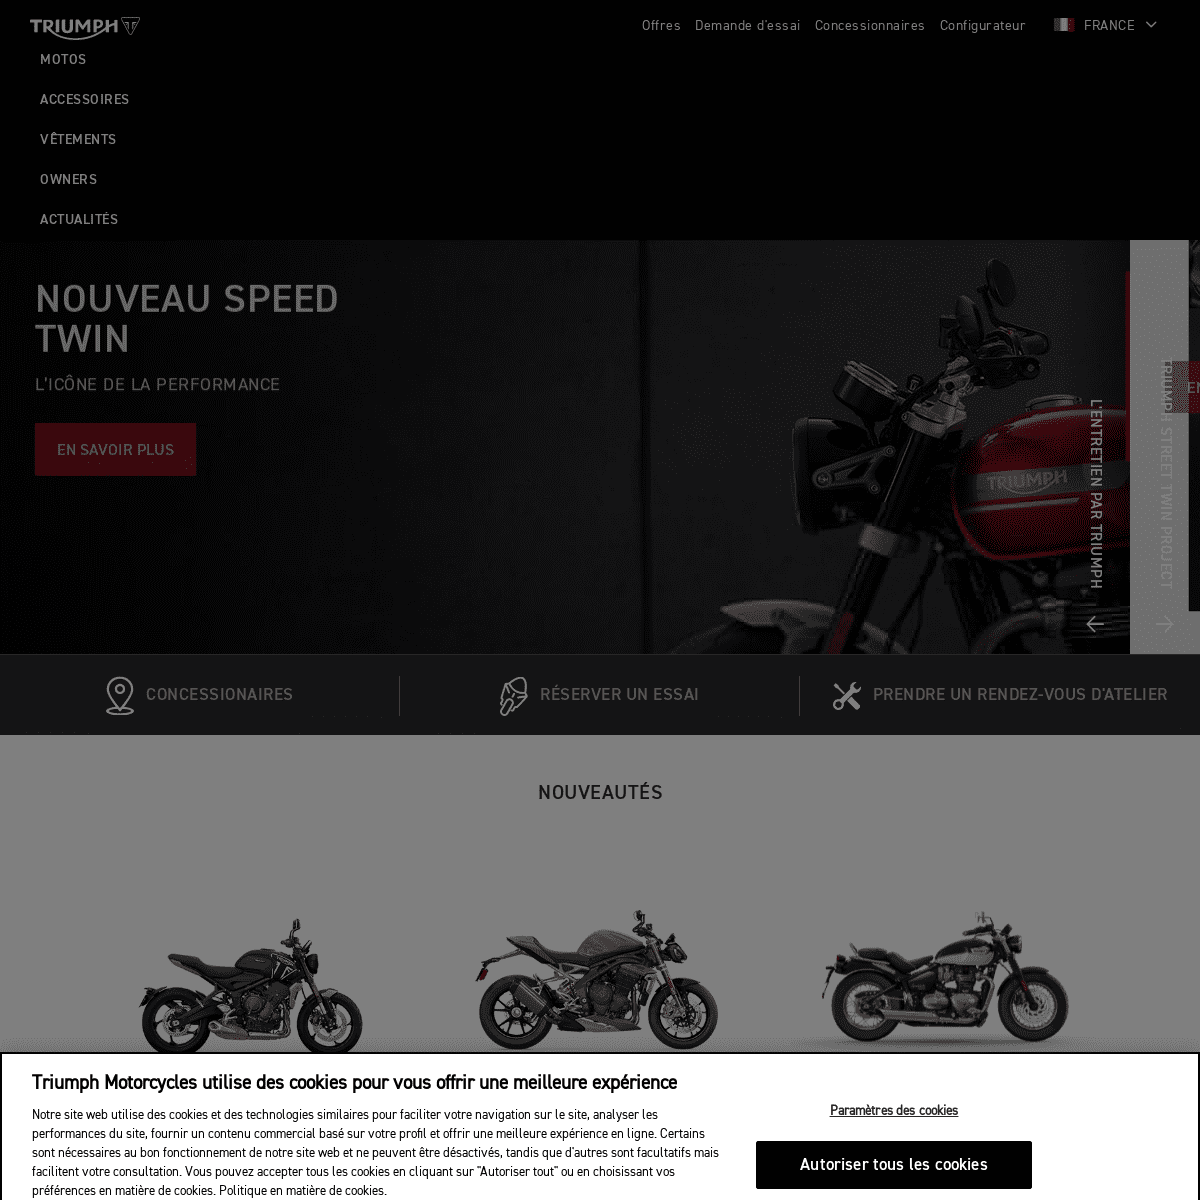 A complete backup of https://triumphmotorcycles.fr